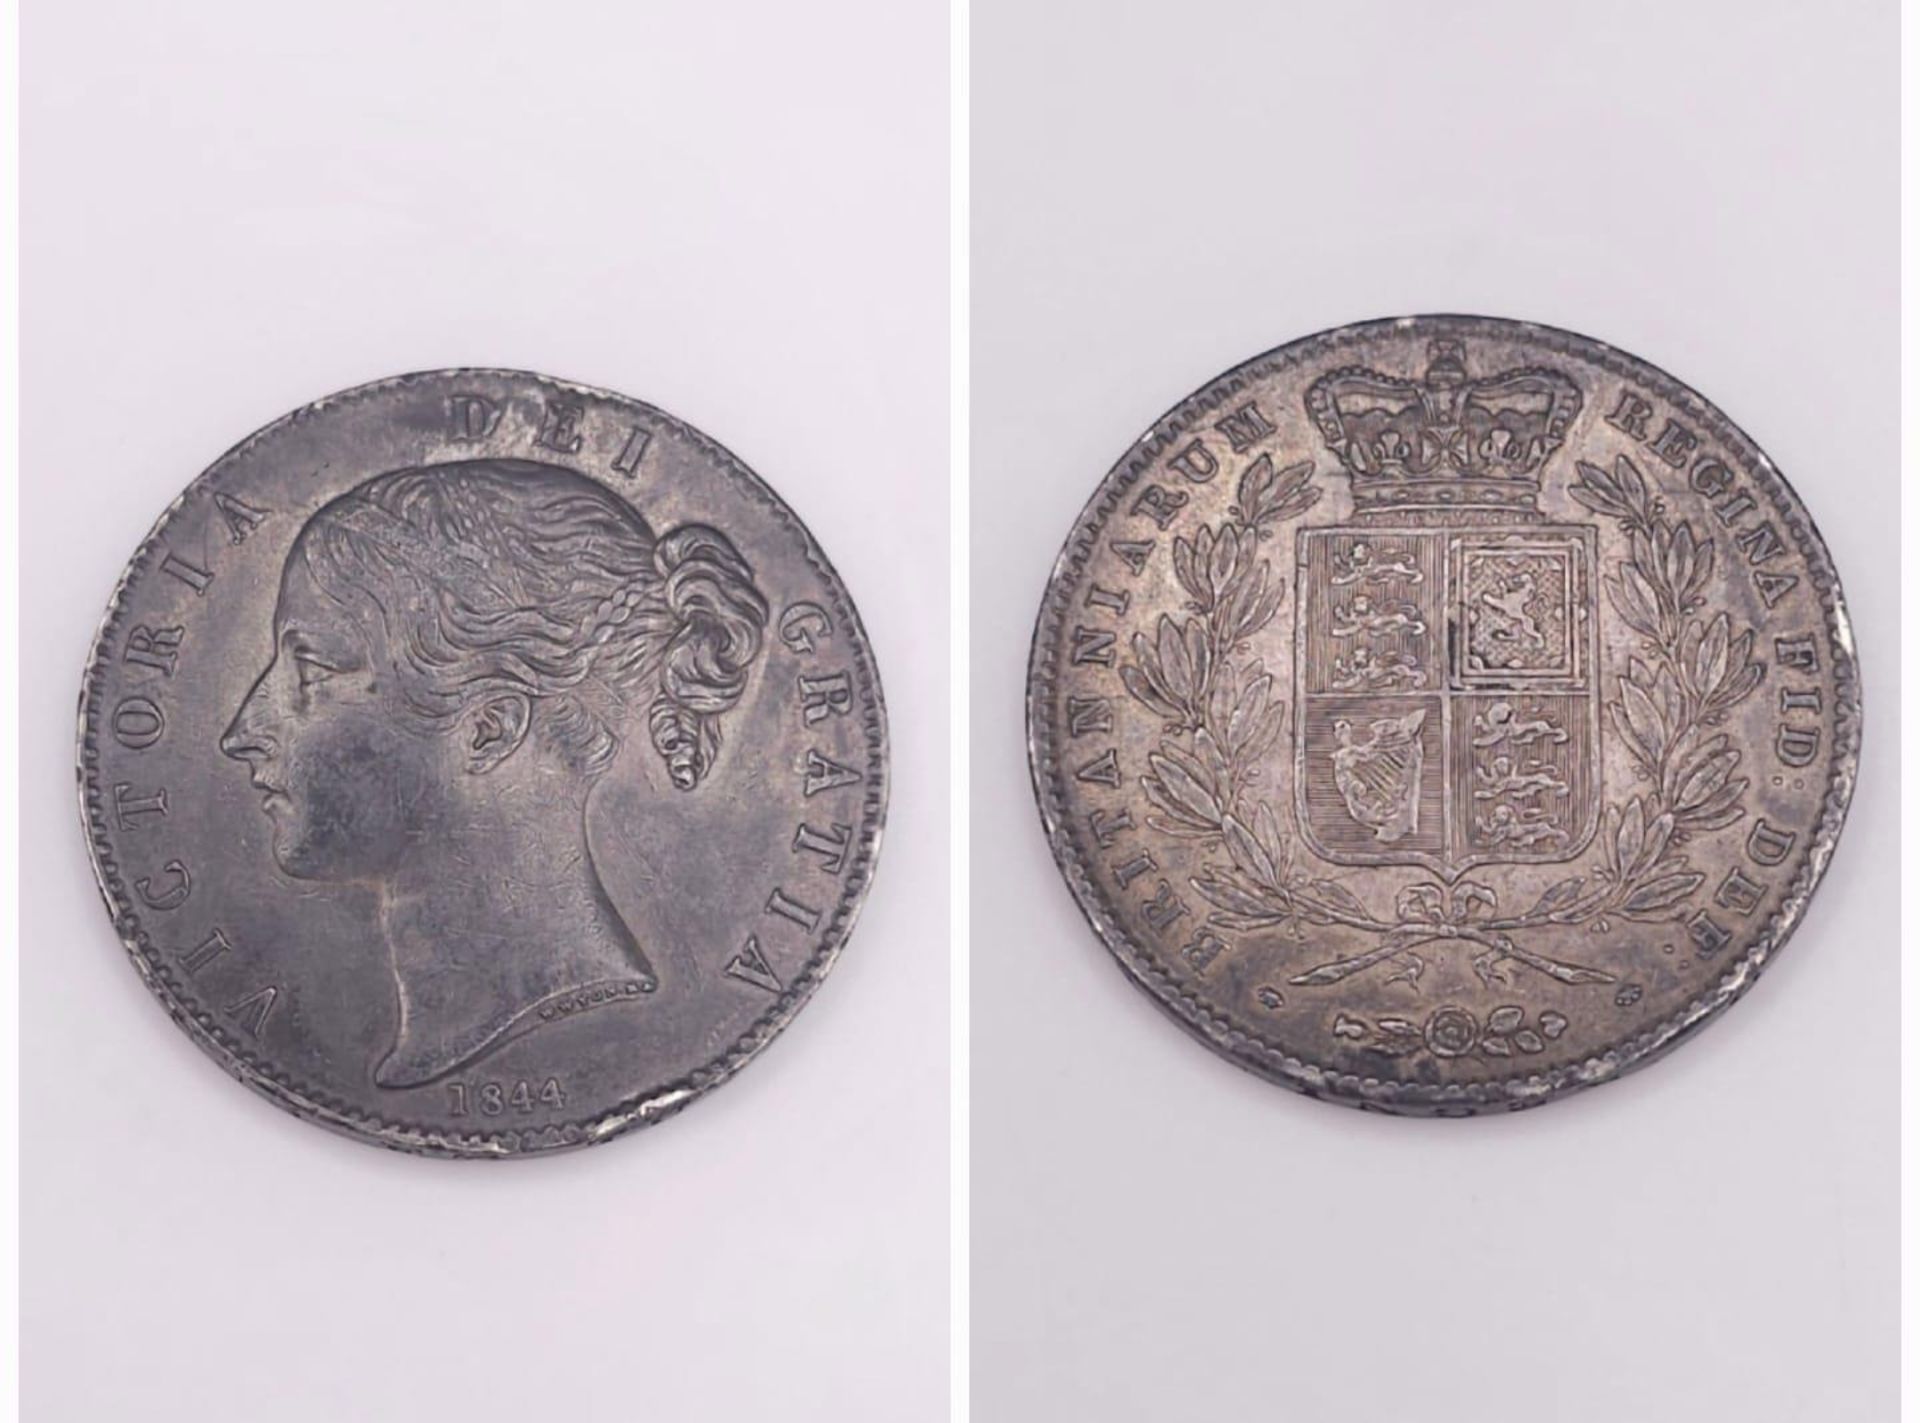 Withdrawn - An 1844 Queen Victoria (Young Head) Silver Crown. High grade but please see photos.